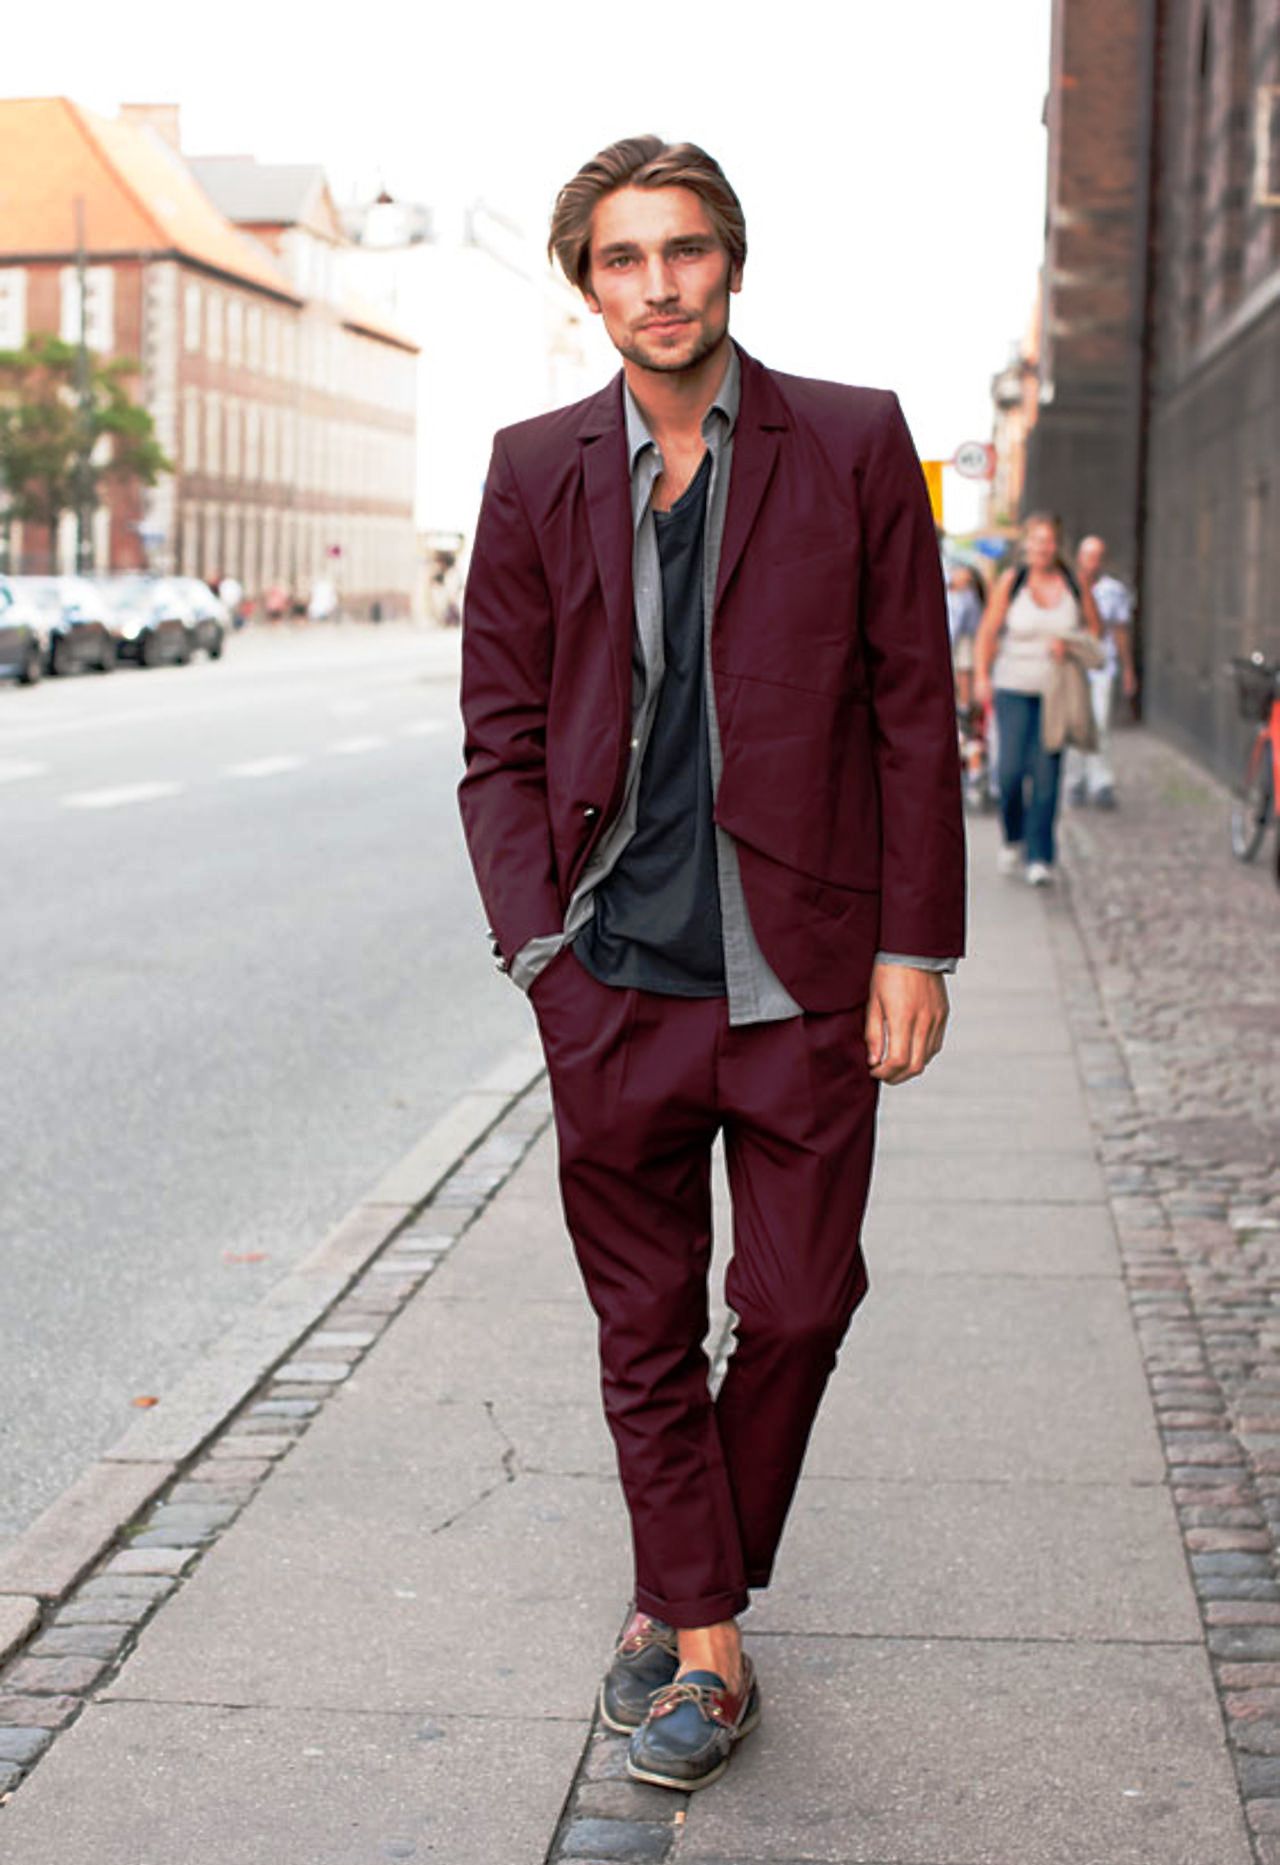 25 Classic Outfits For Men’s To Try In 2016 – Mens Craze